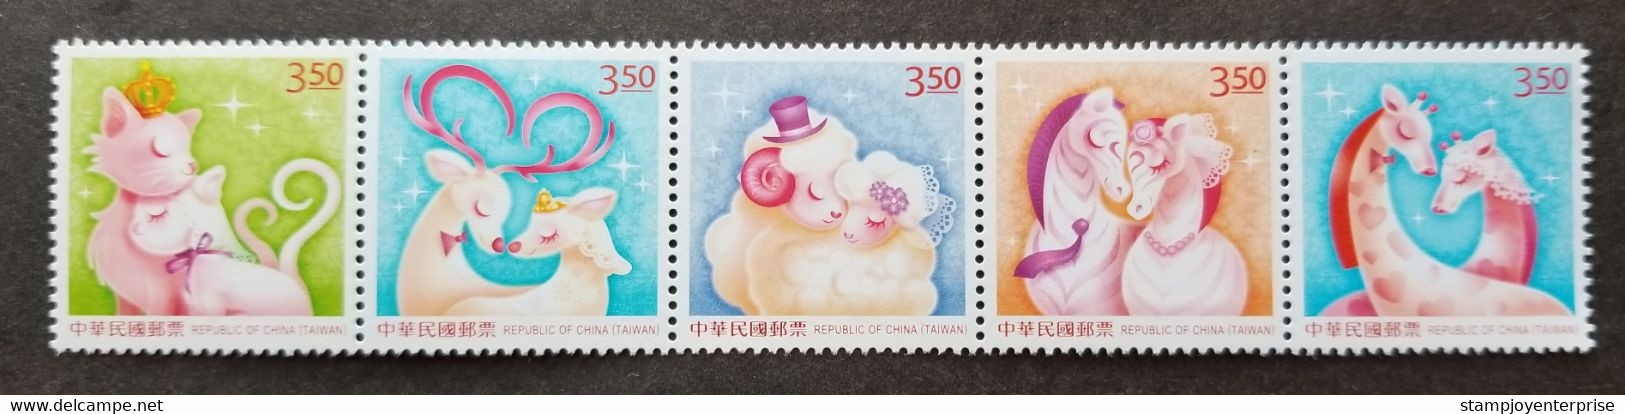 Taiwan Personal Greeting Best Wishes Love 2015 Deer Cat Horse Goat Zebra Giraffe (stamp) MNH - Unused Stamps